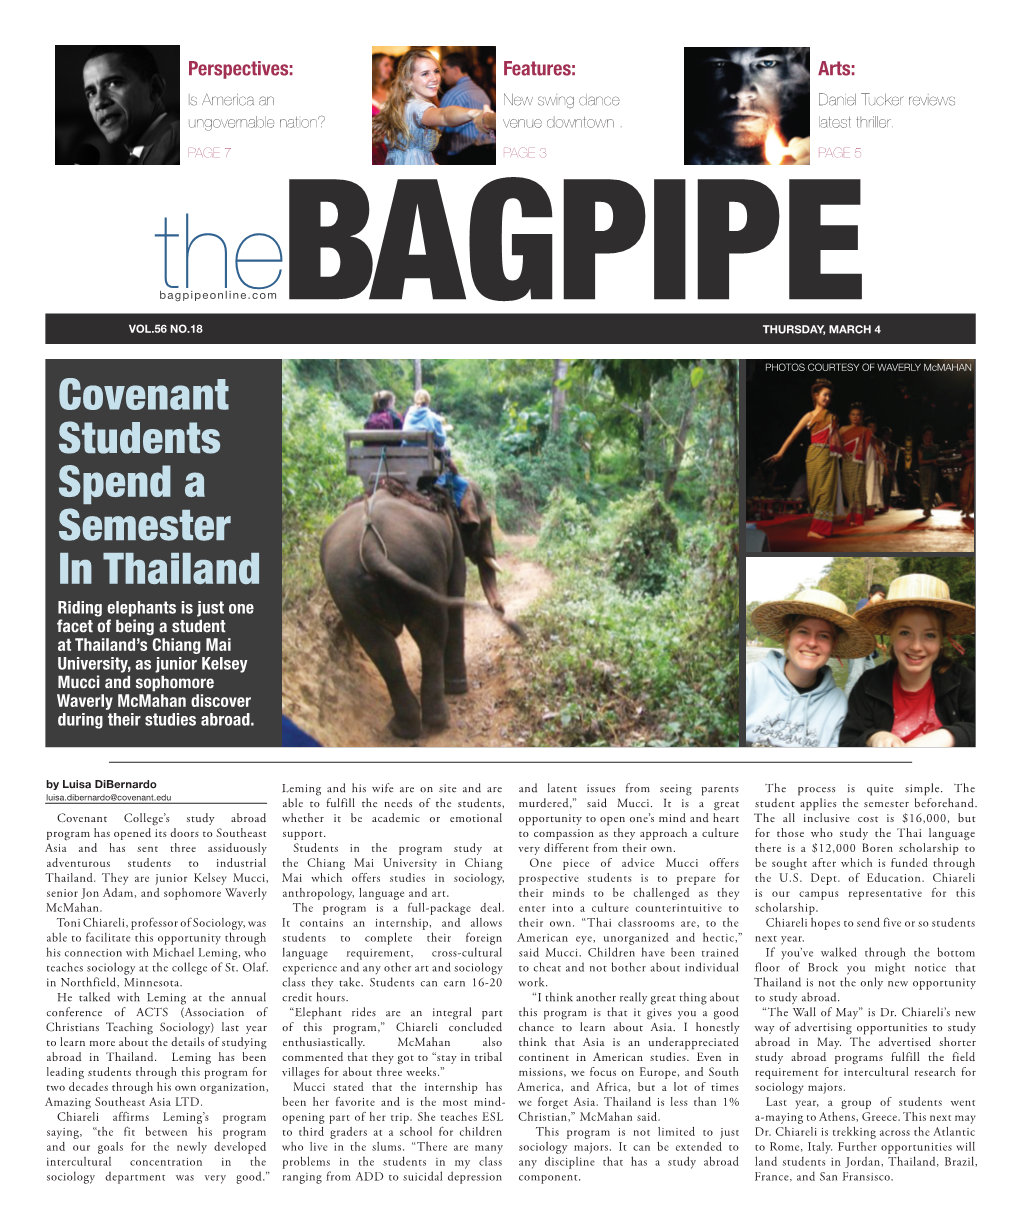 Covenant Students Spend a Semester in Thailand